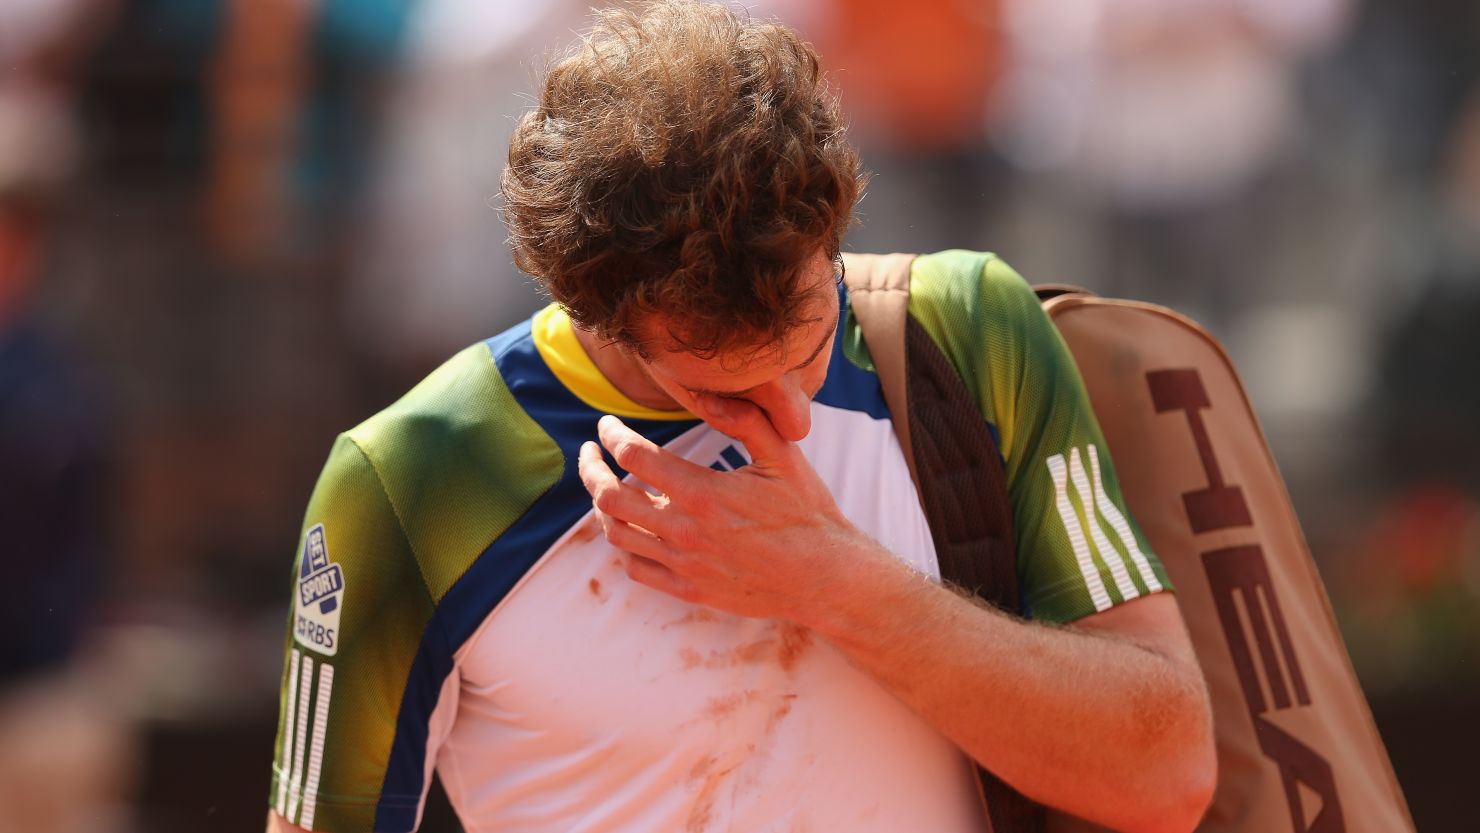 Andy Murray was visibly upset after being forced to retire during his second round match at the Rome Masters.